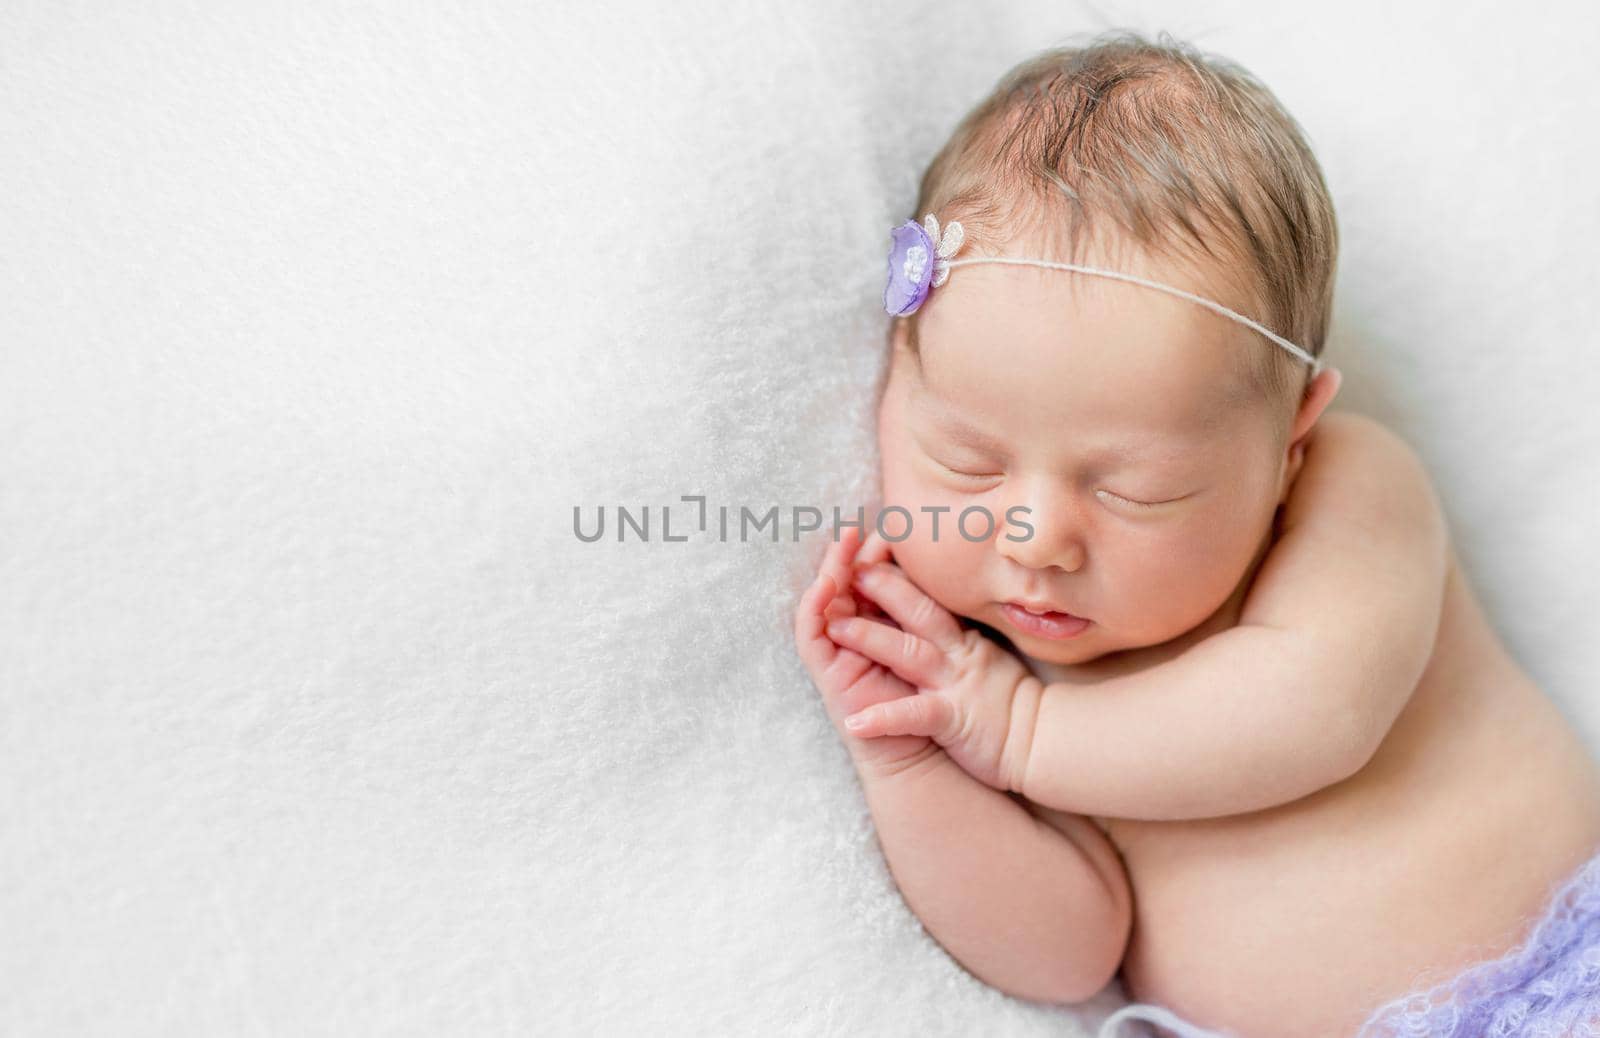 lovely newborn girl sleeping with hands under head, top view by tan4ikk1